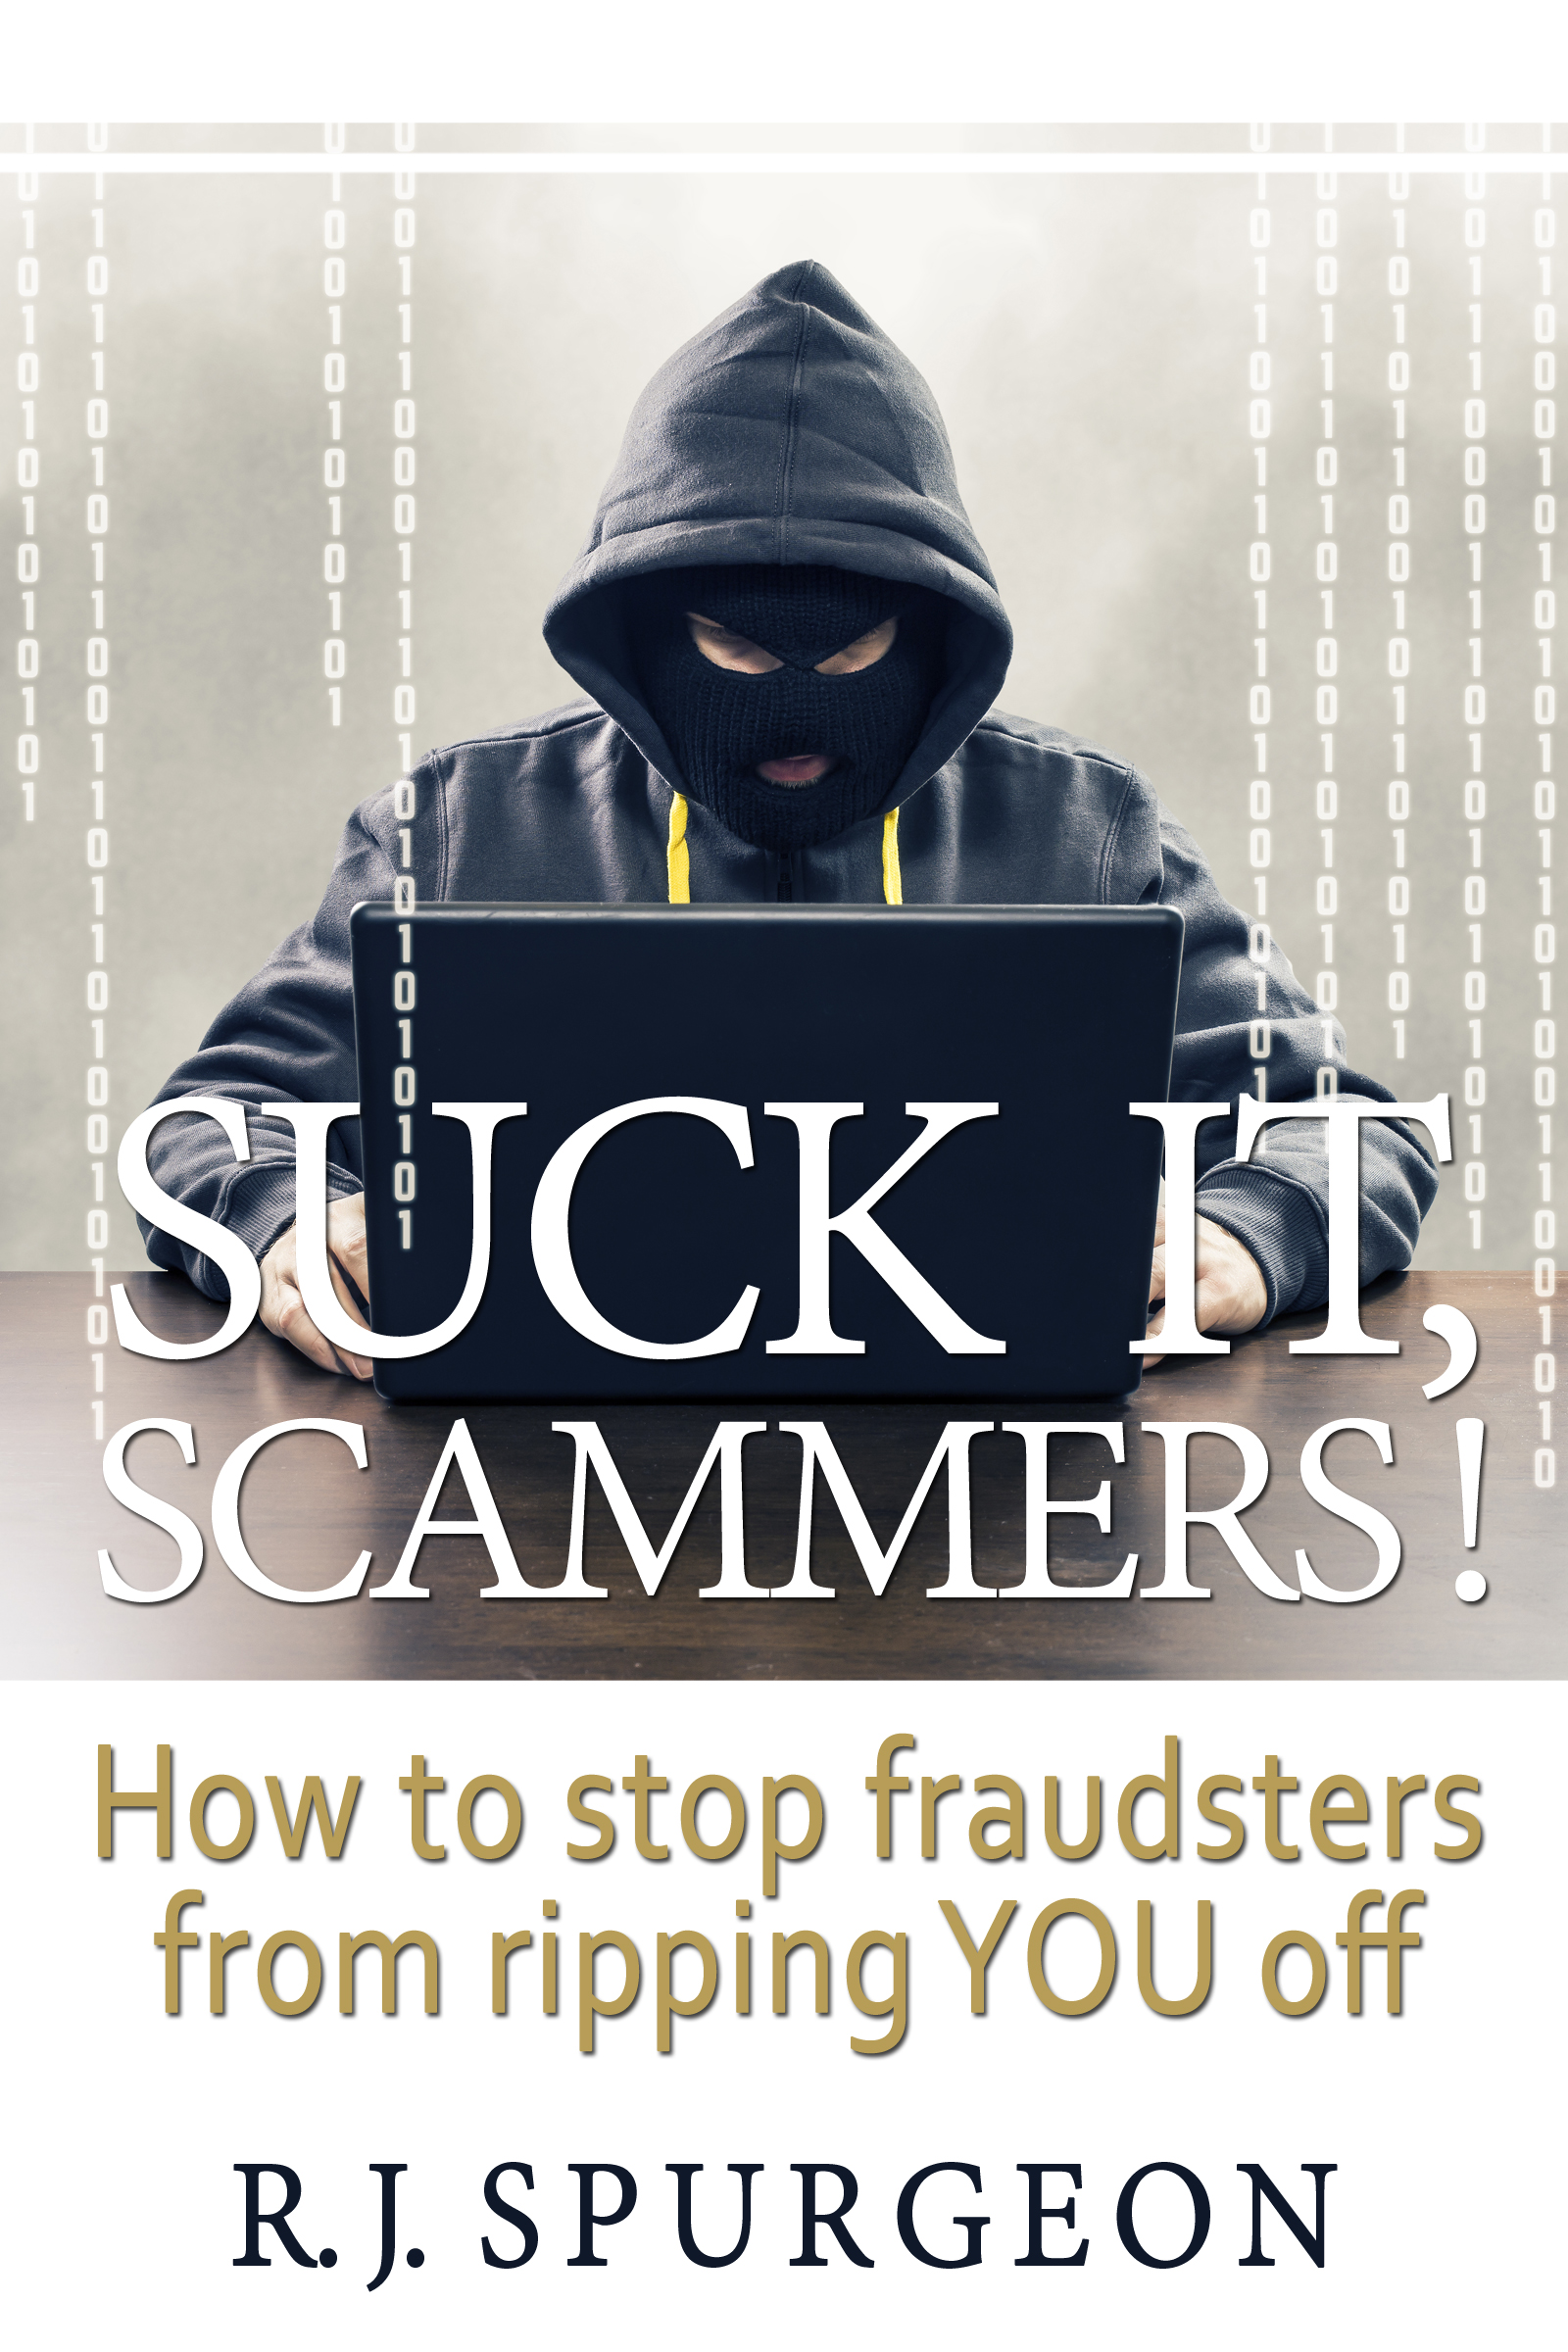 Suck It, Scammers! How to stop fraudsters from ripping you off